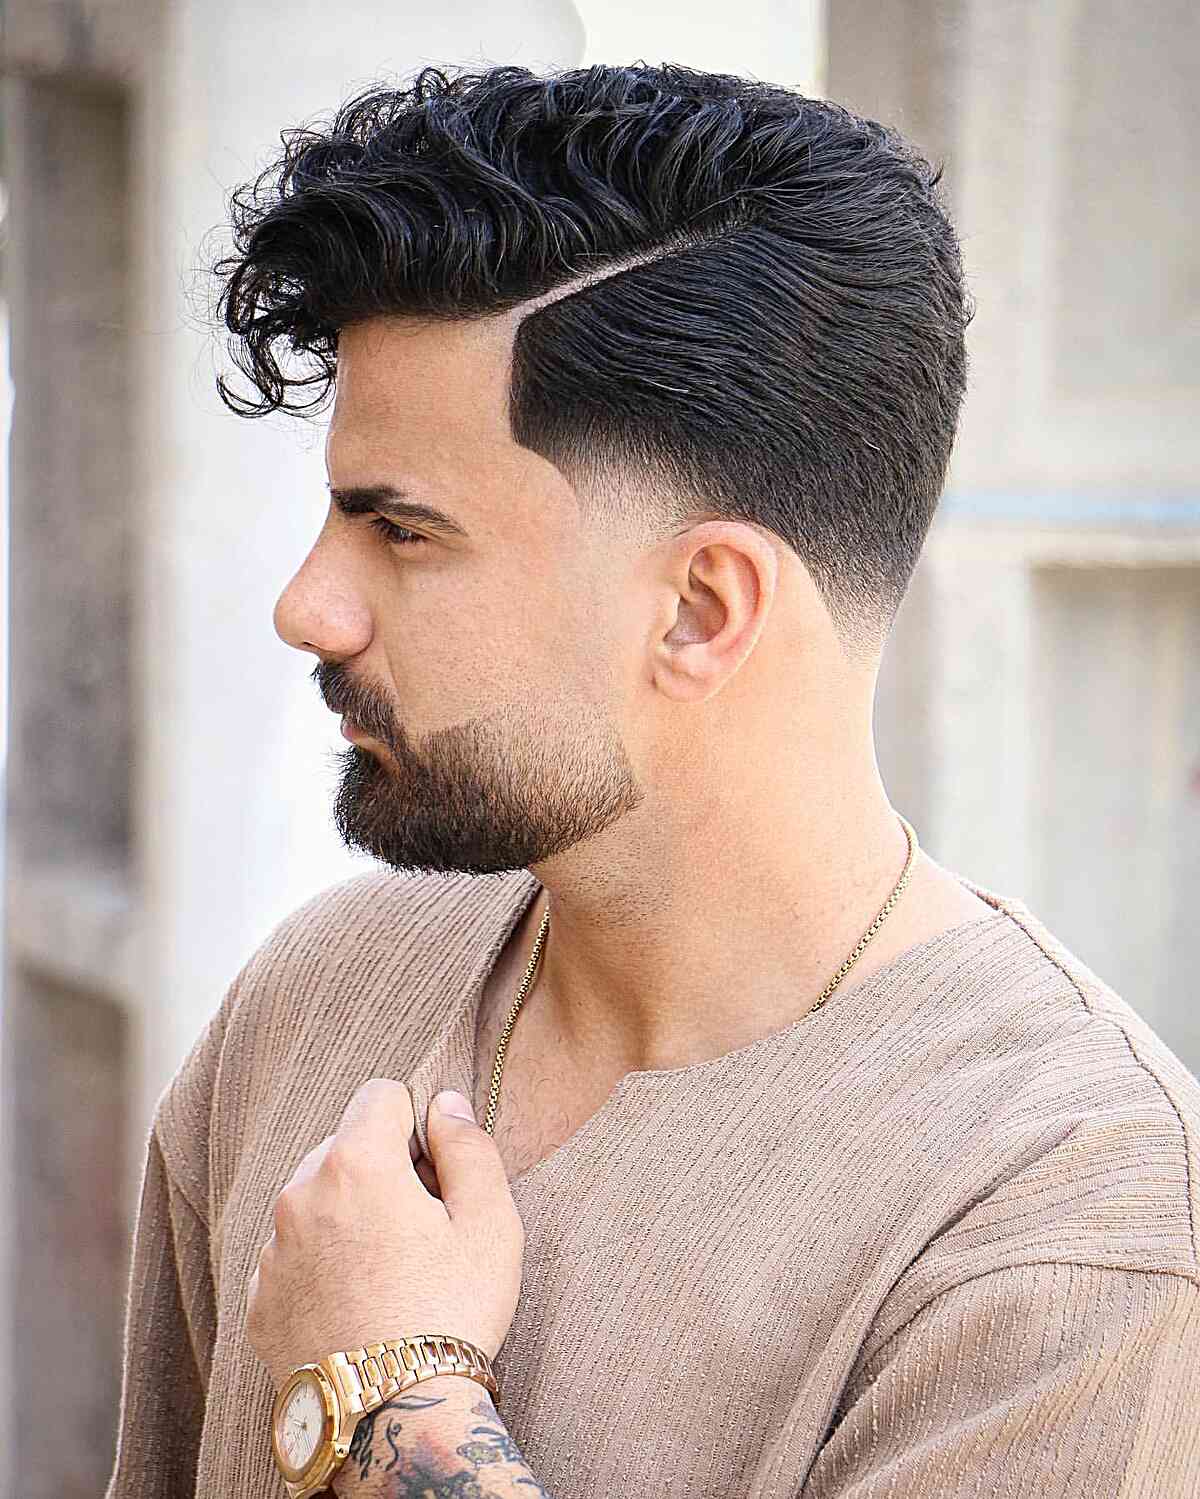 Sexy Beard Fade with a Sharp Hard Part for Guys